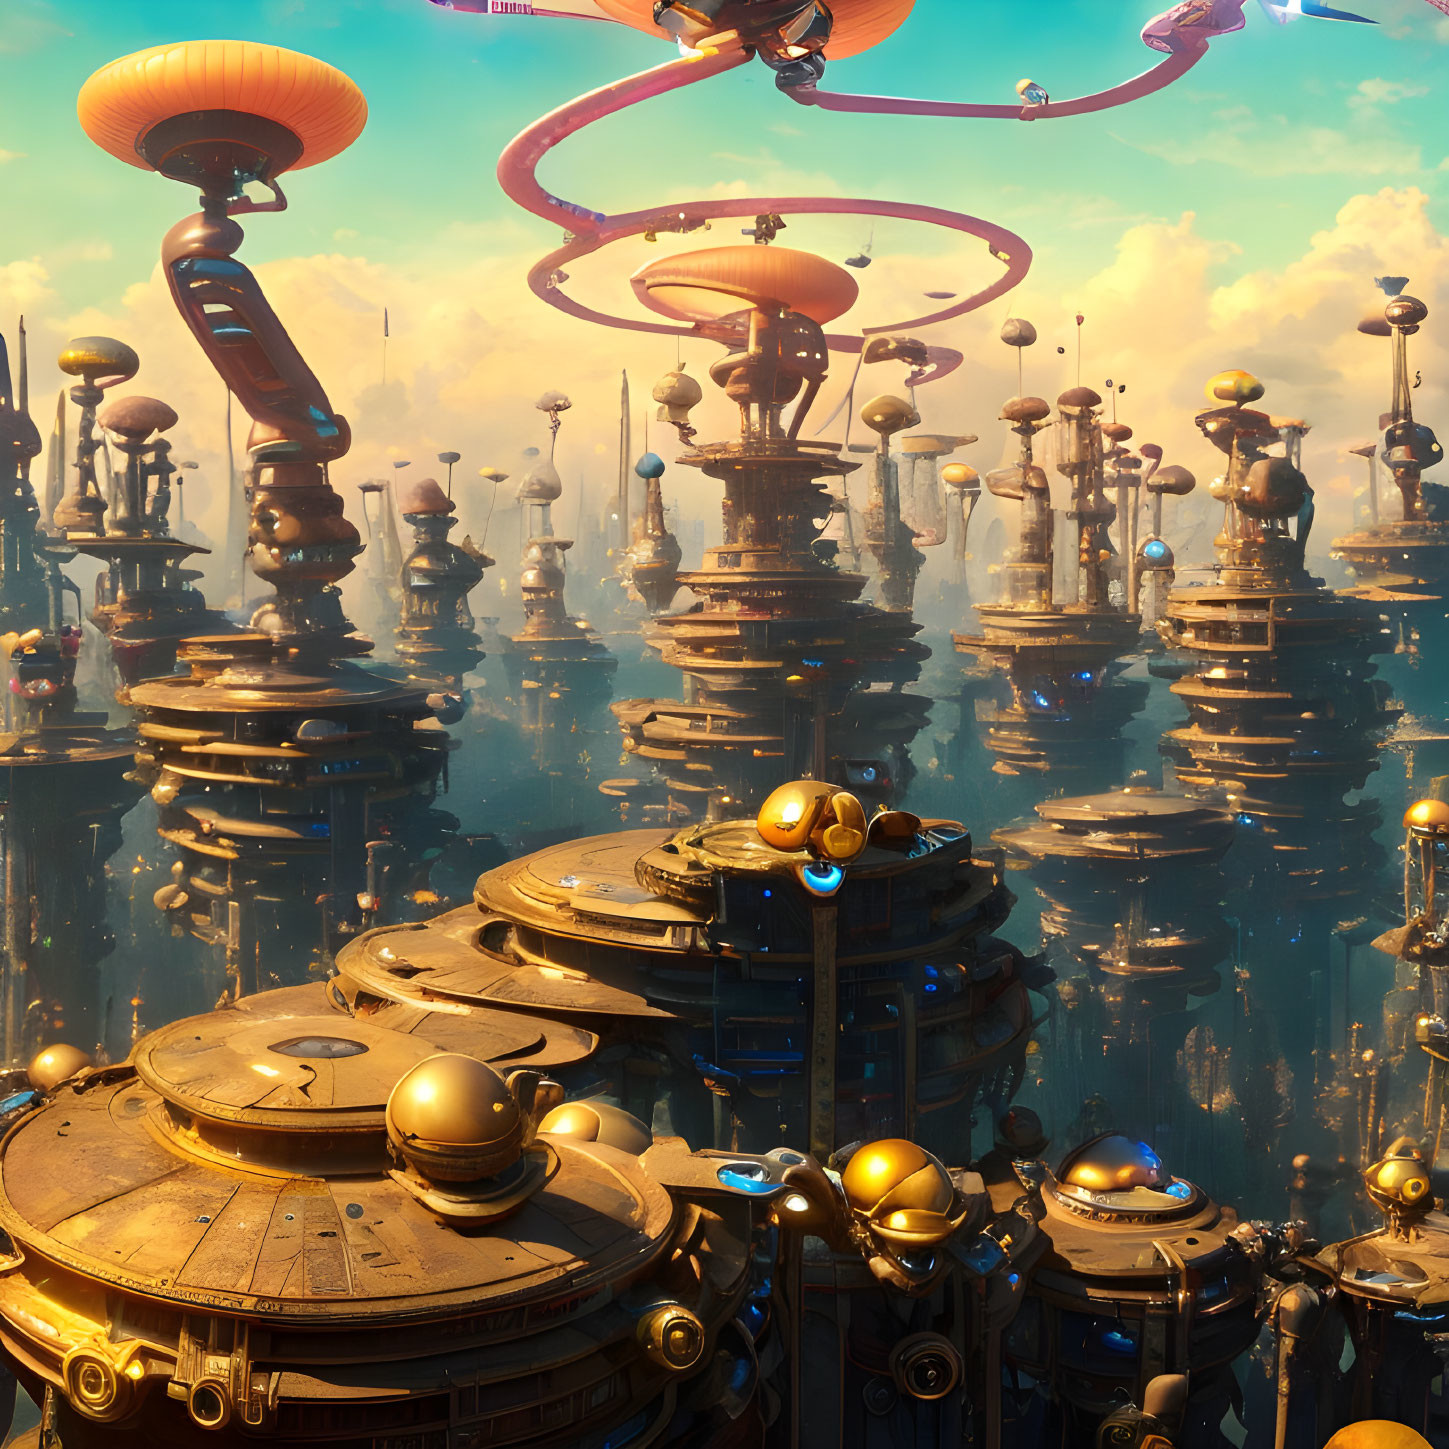 Futuristic cityscape with towering spires and flying vehicles in golden sky